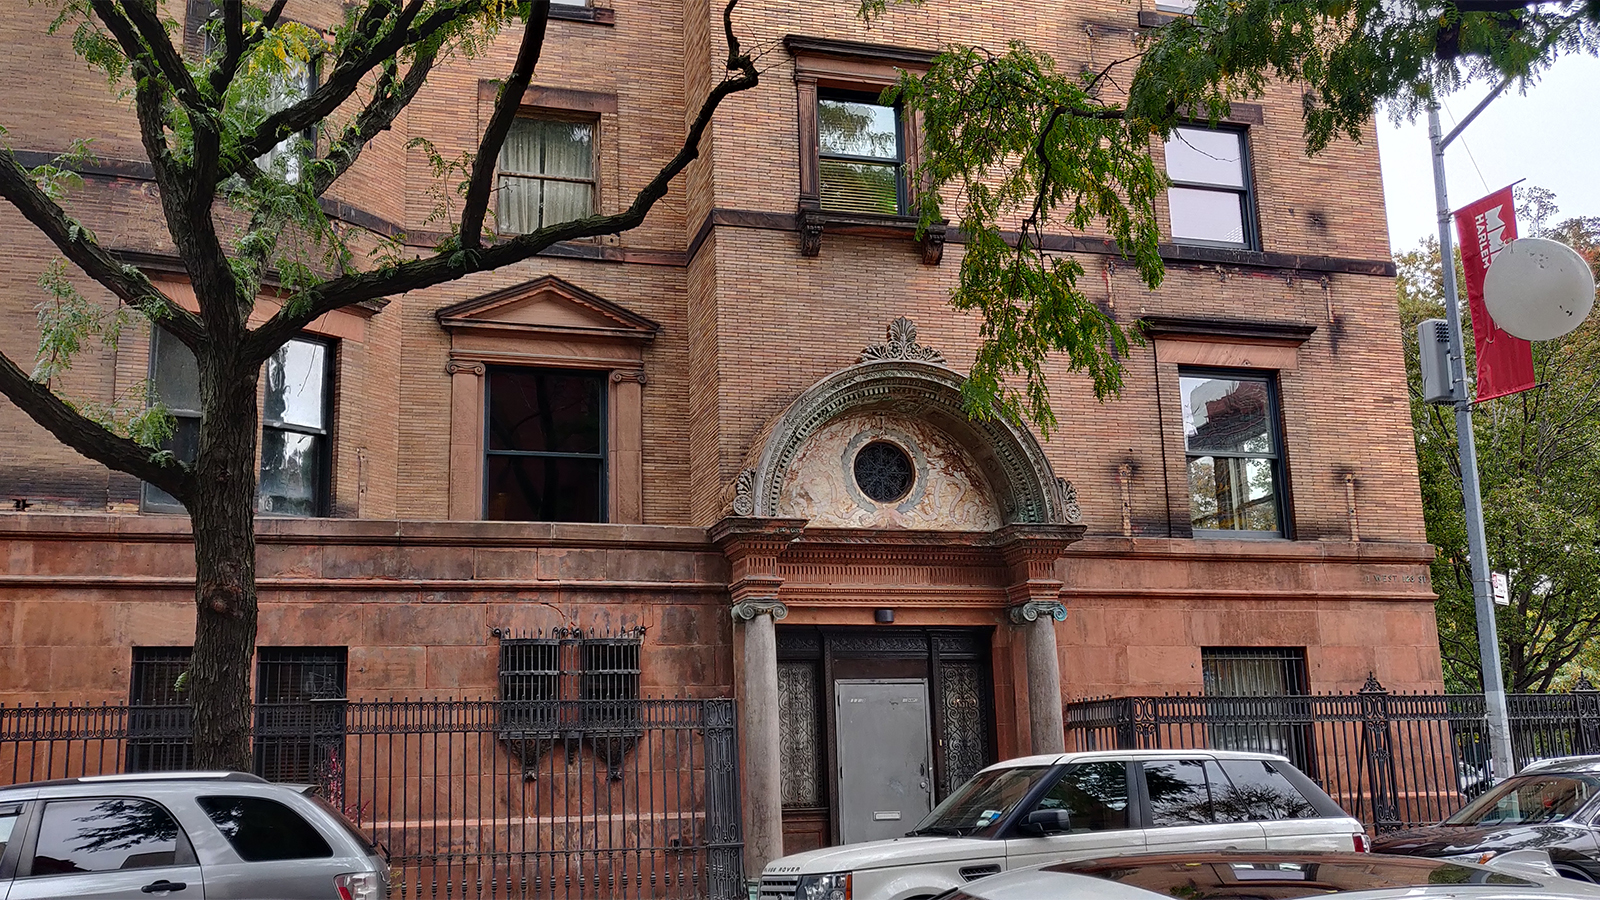 The former Synagogue for the Commandment Keepers Ethiopian Hebrew Congregation of the Living God Pillar & Ground of Truth, Inc. in Harlem, New York, on Nov. 2, 2021. The property is now owned by English poet James Fenton and his partner Darryl Pinckney. It is being renovated for them. RNS photo by Nidhi Upadhyaya